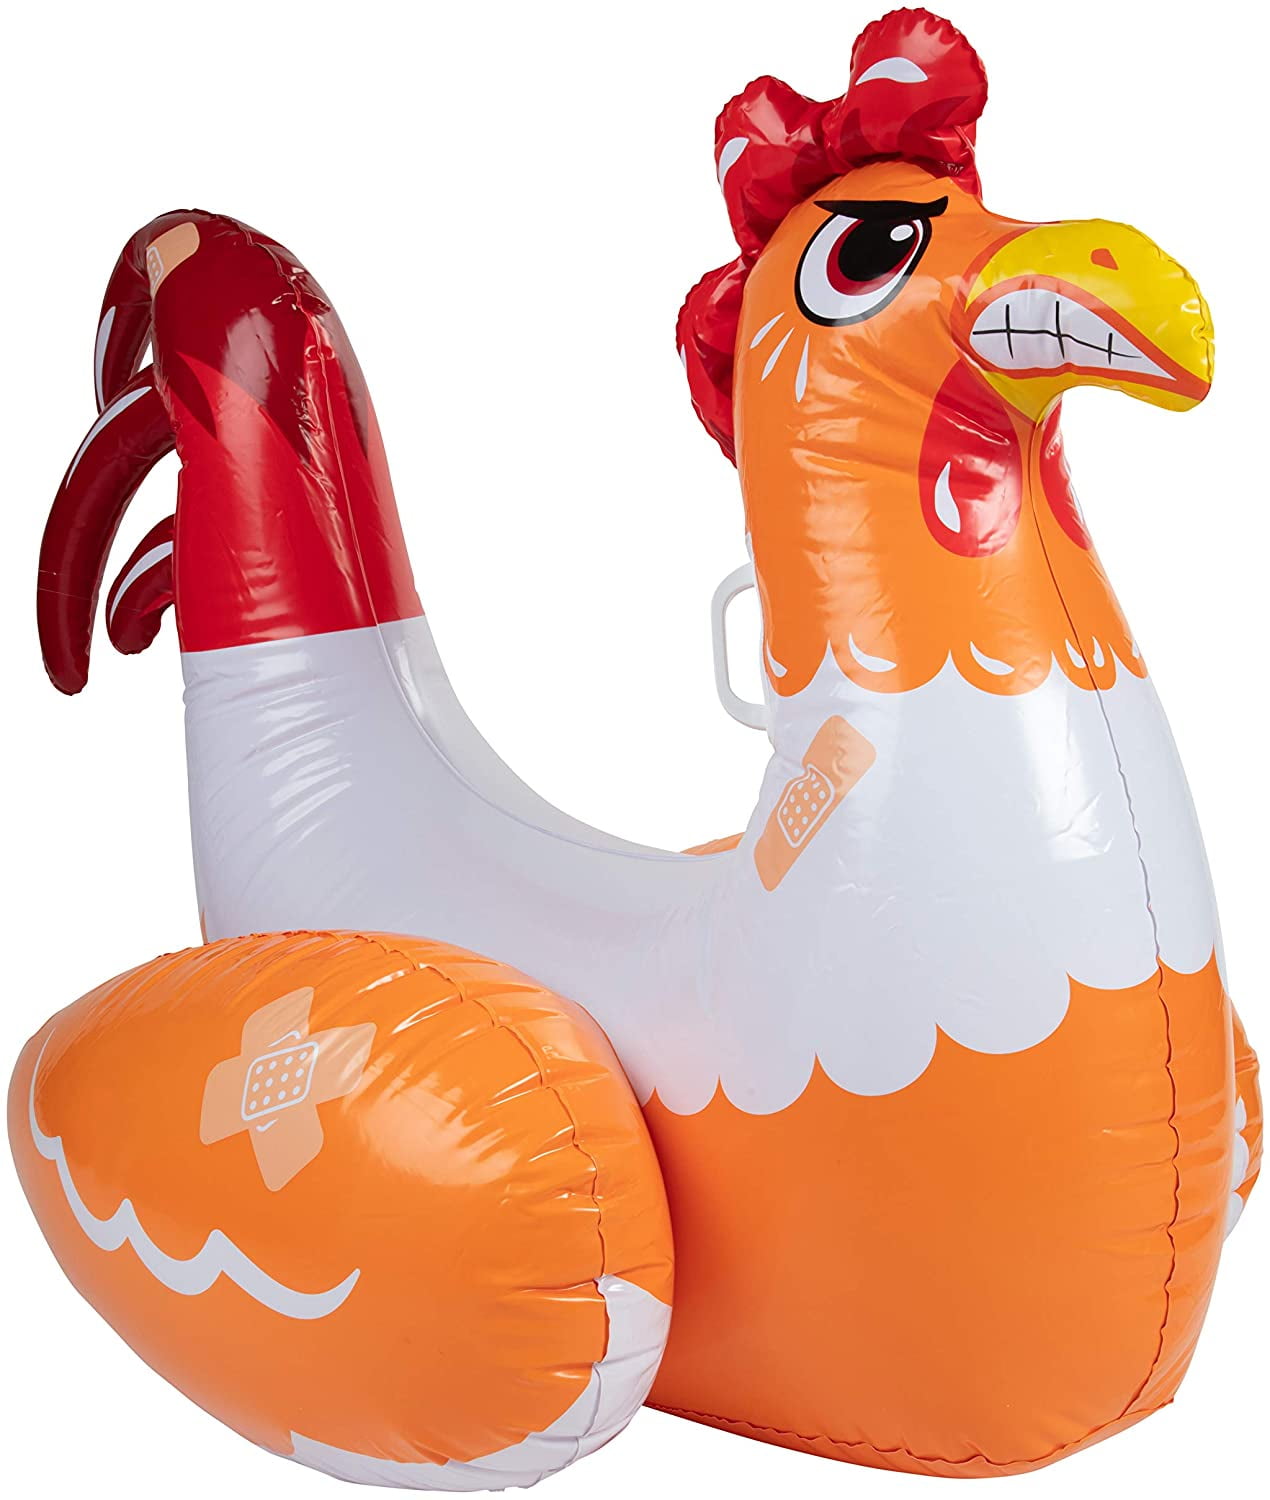 ❤ ️PLAY DAY CHICKEN FIGHT POOL GAME INFLATABLE NEW FREE S/H 2 RIDE-ON CHICK...